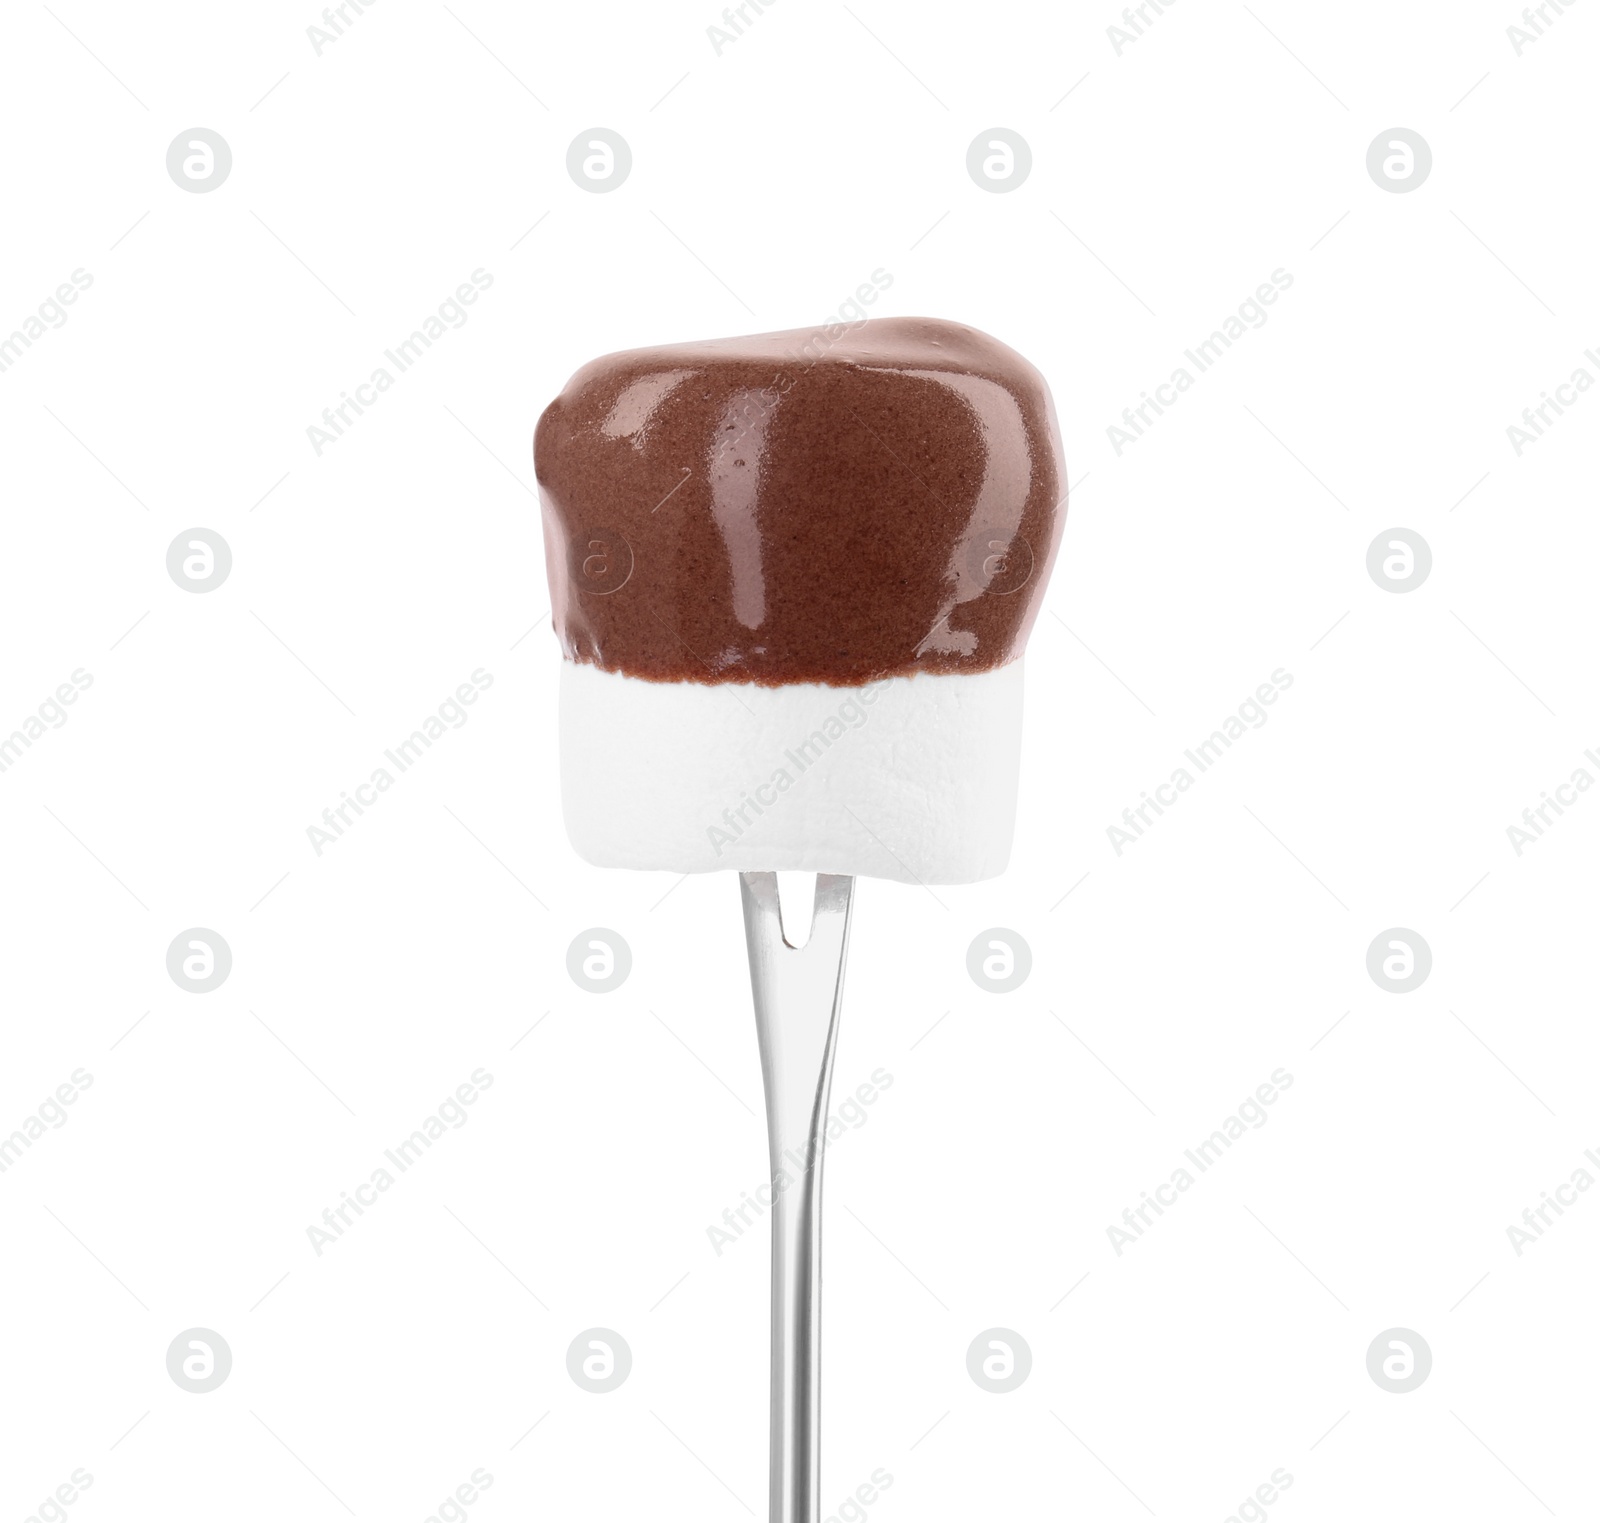 Photo of Marshmallow with melted chocolate on fondue fork against white background